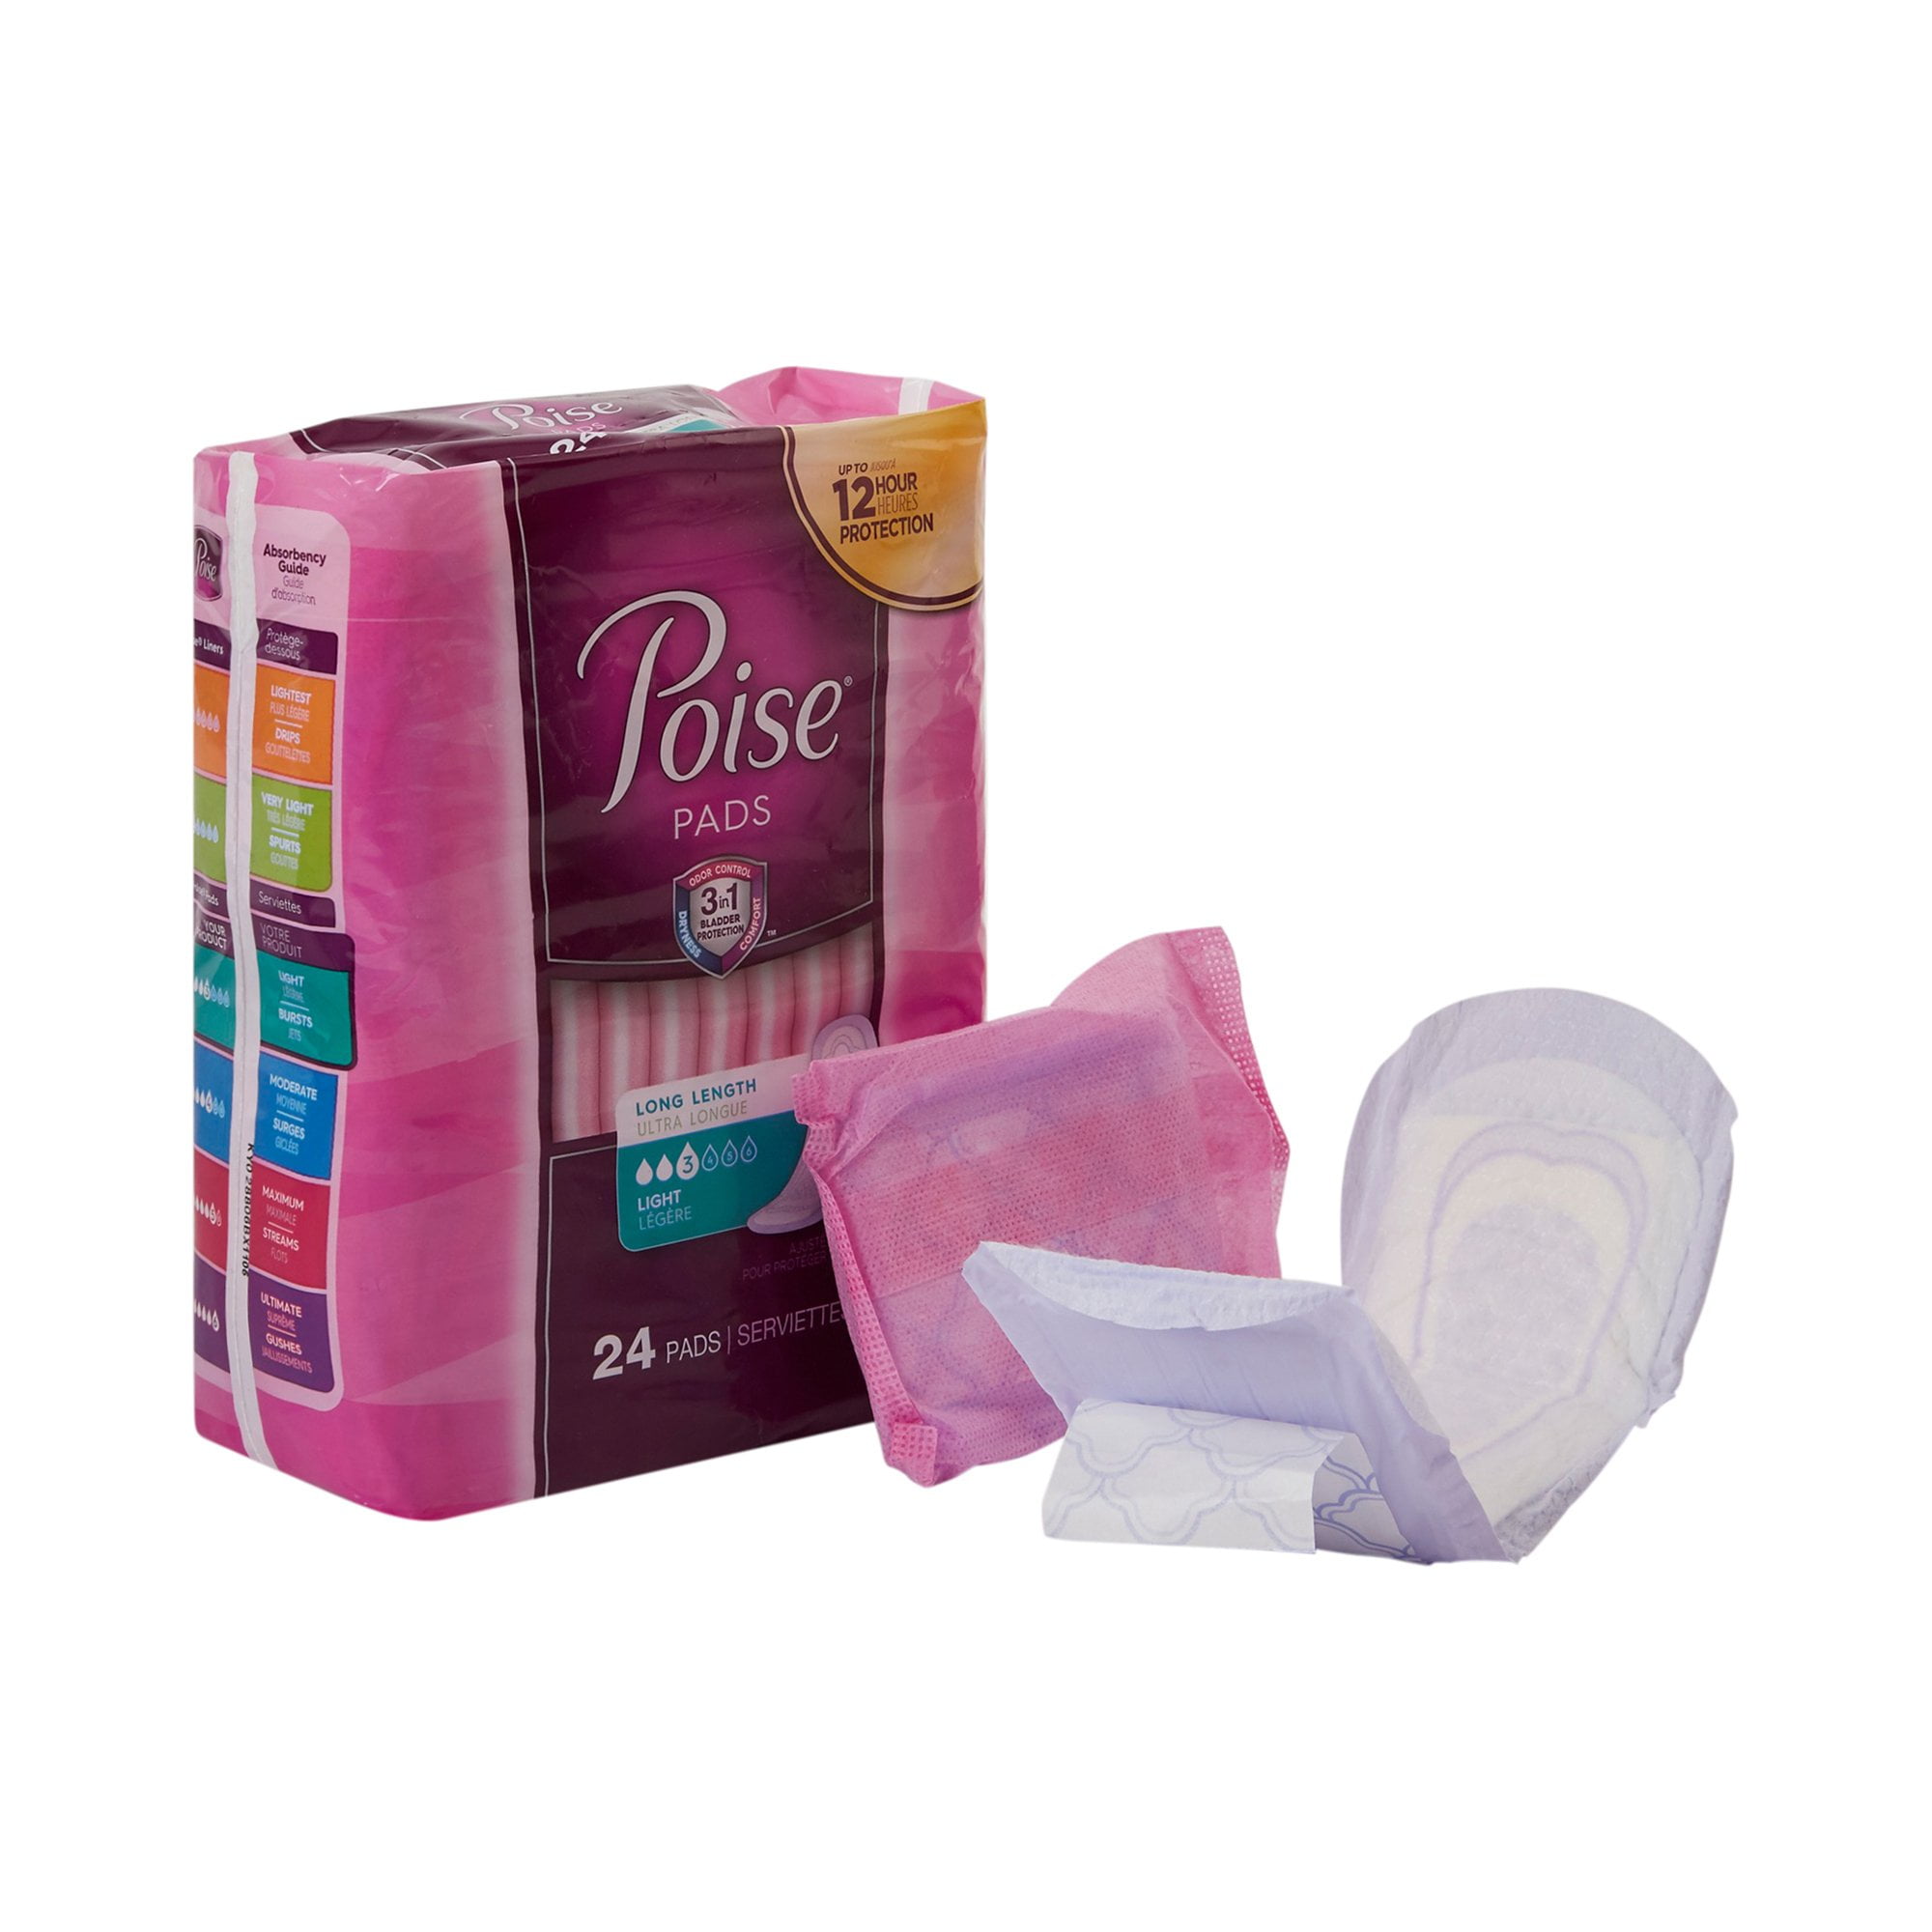 4 x 24 PACKS) Poise Incontinence Pads, Liners, Light Absorbency, Long, 96  ct ✓